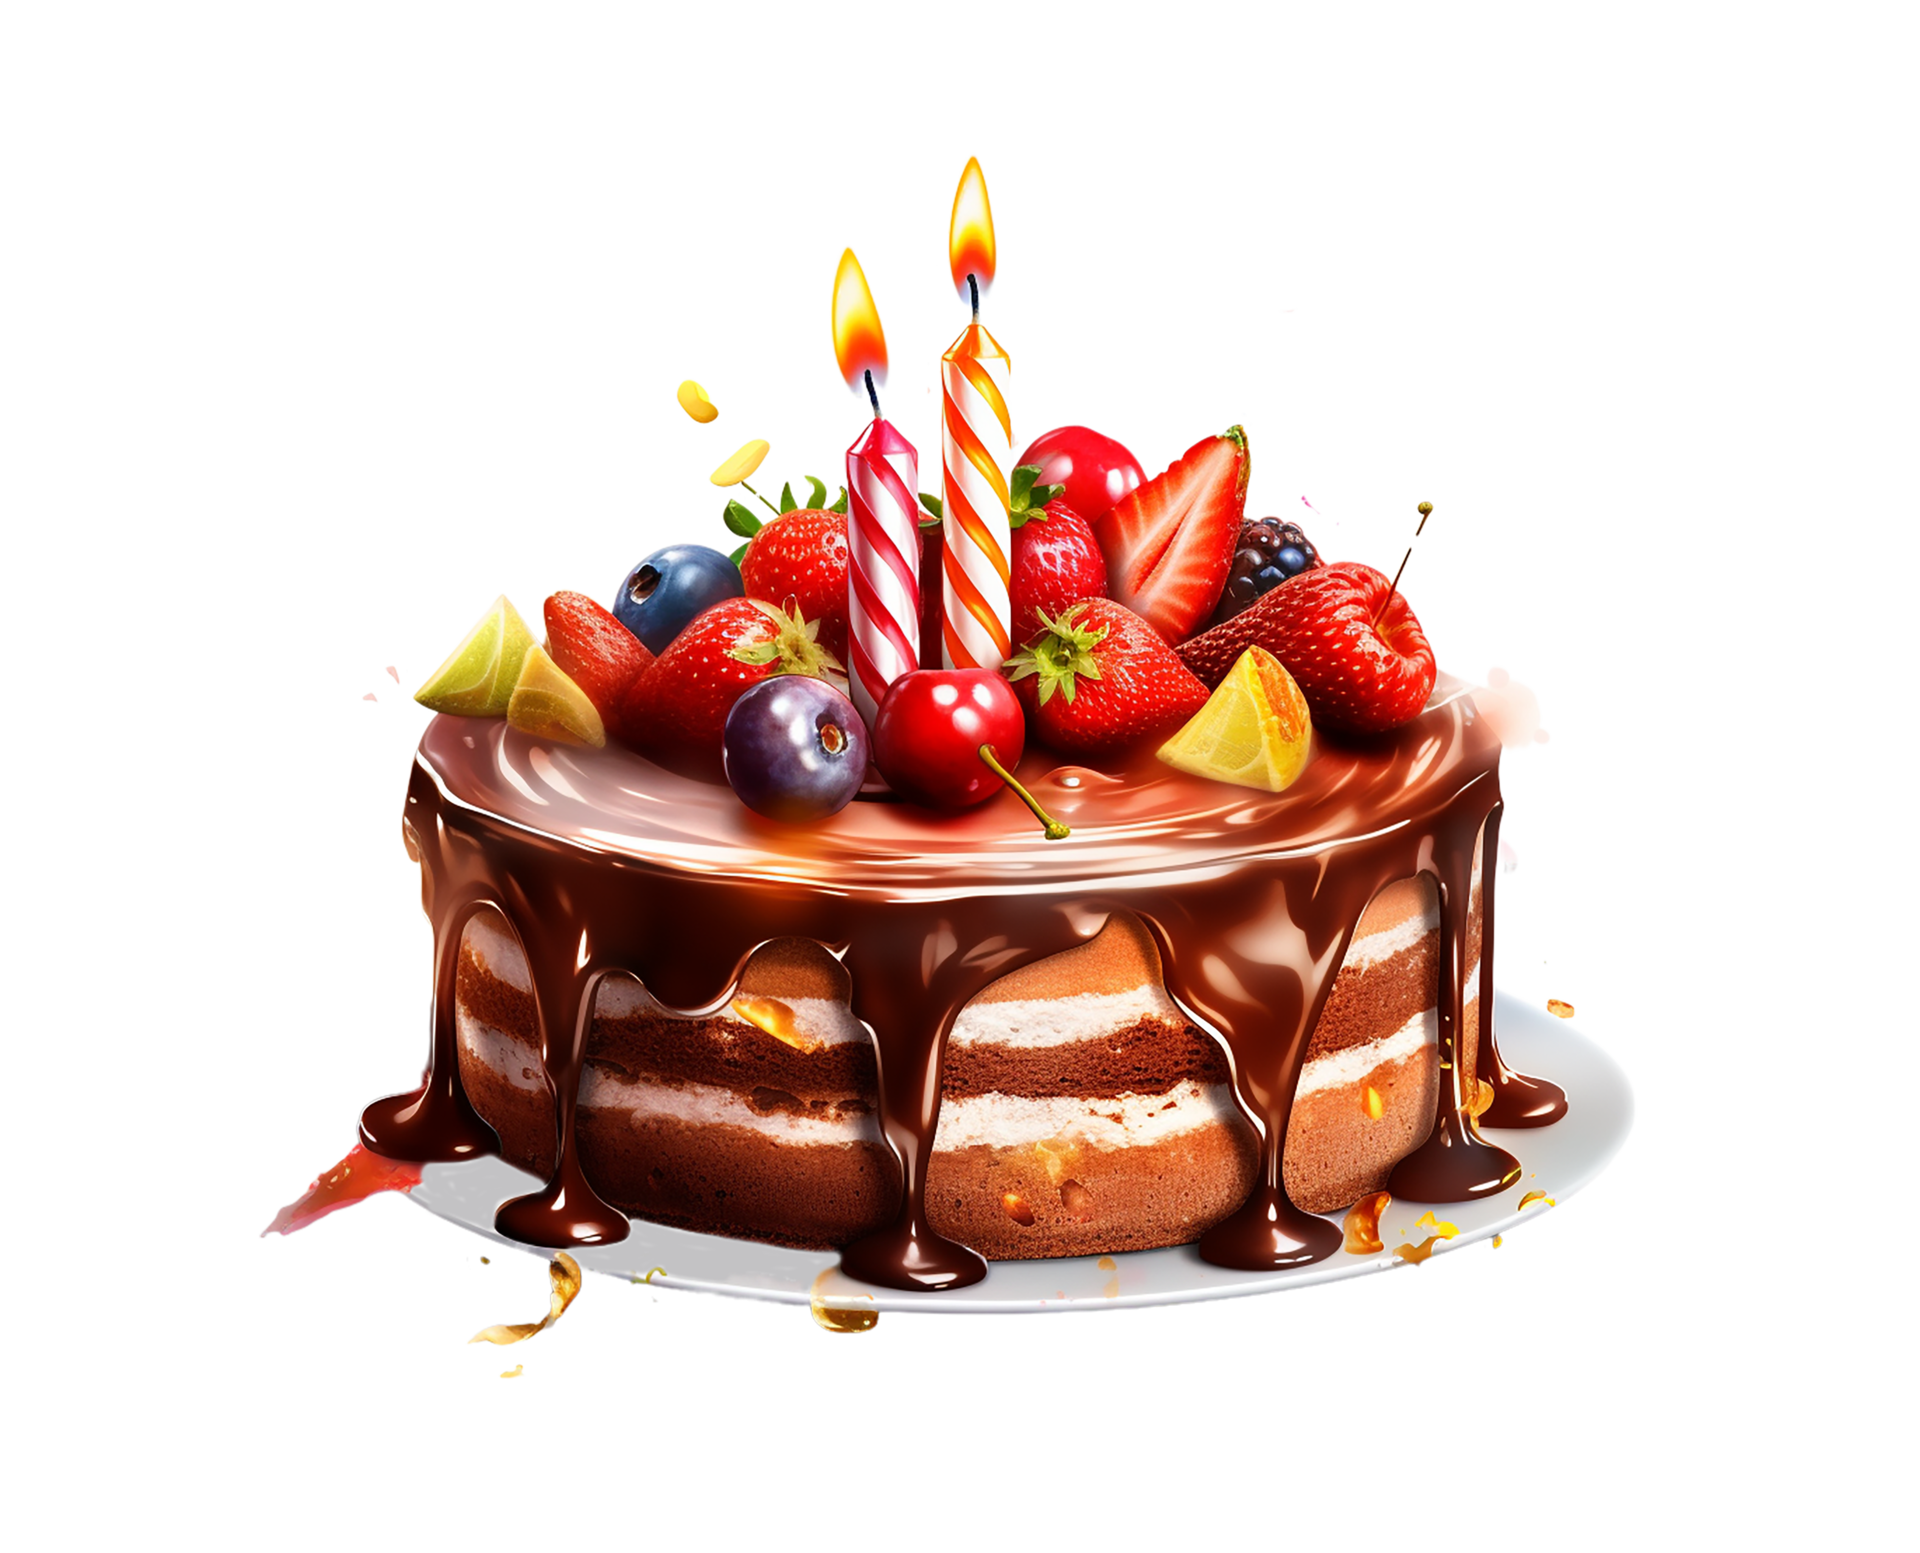 Birthday Cake PNG Clip Art Image​ | Gallery Yopriceville - High-Quality  Free Images and Transparent PNG Clipart